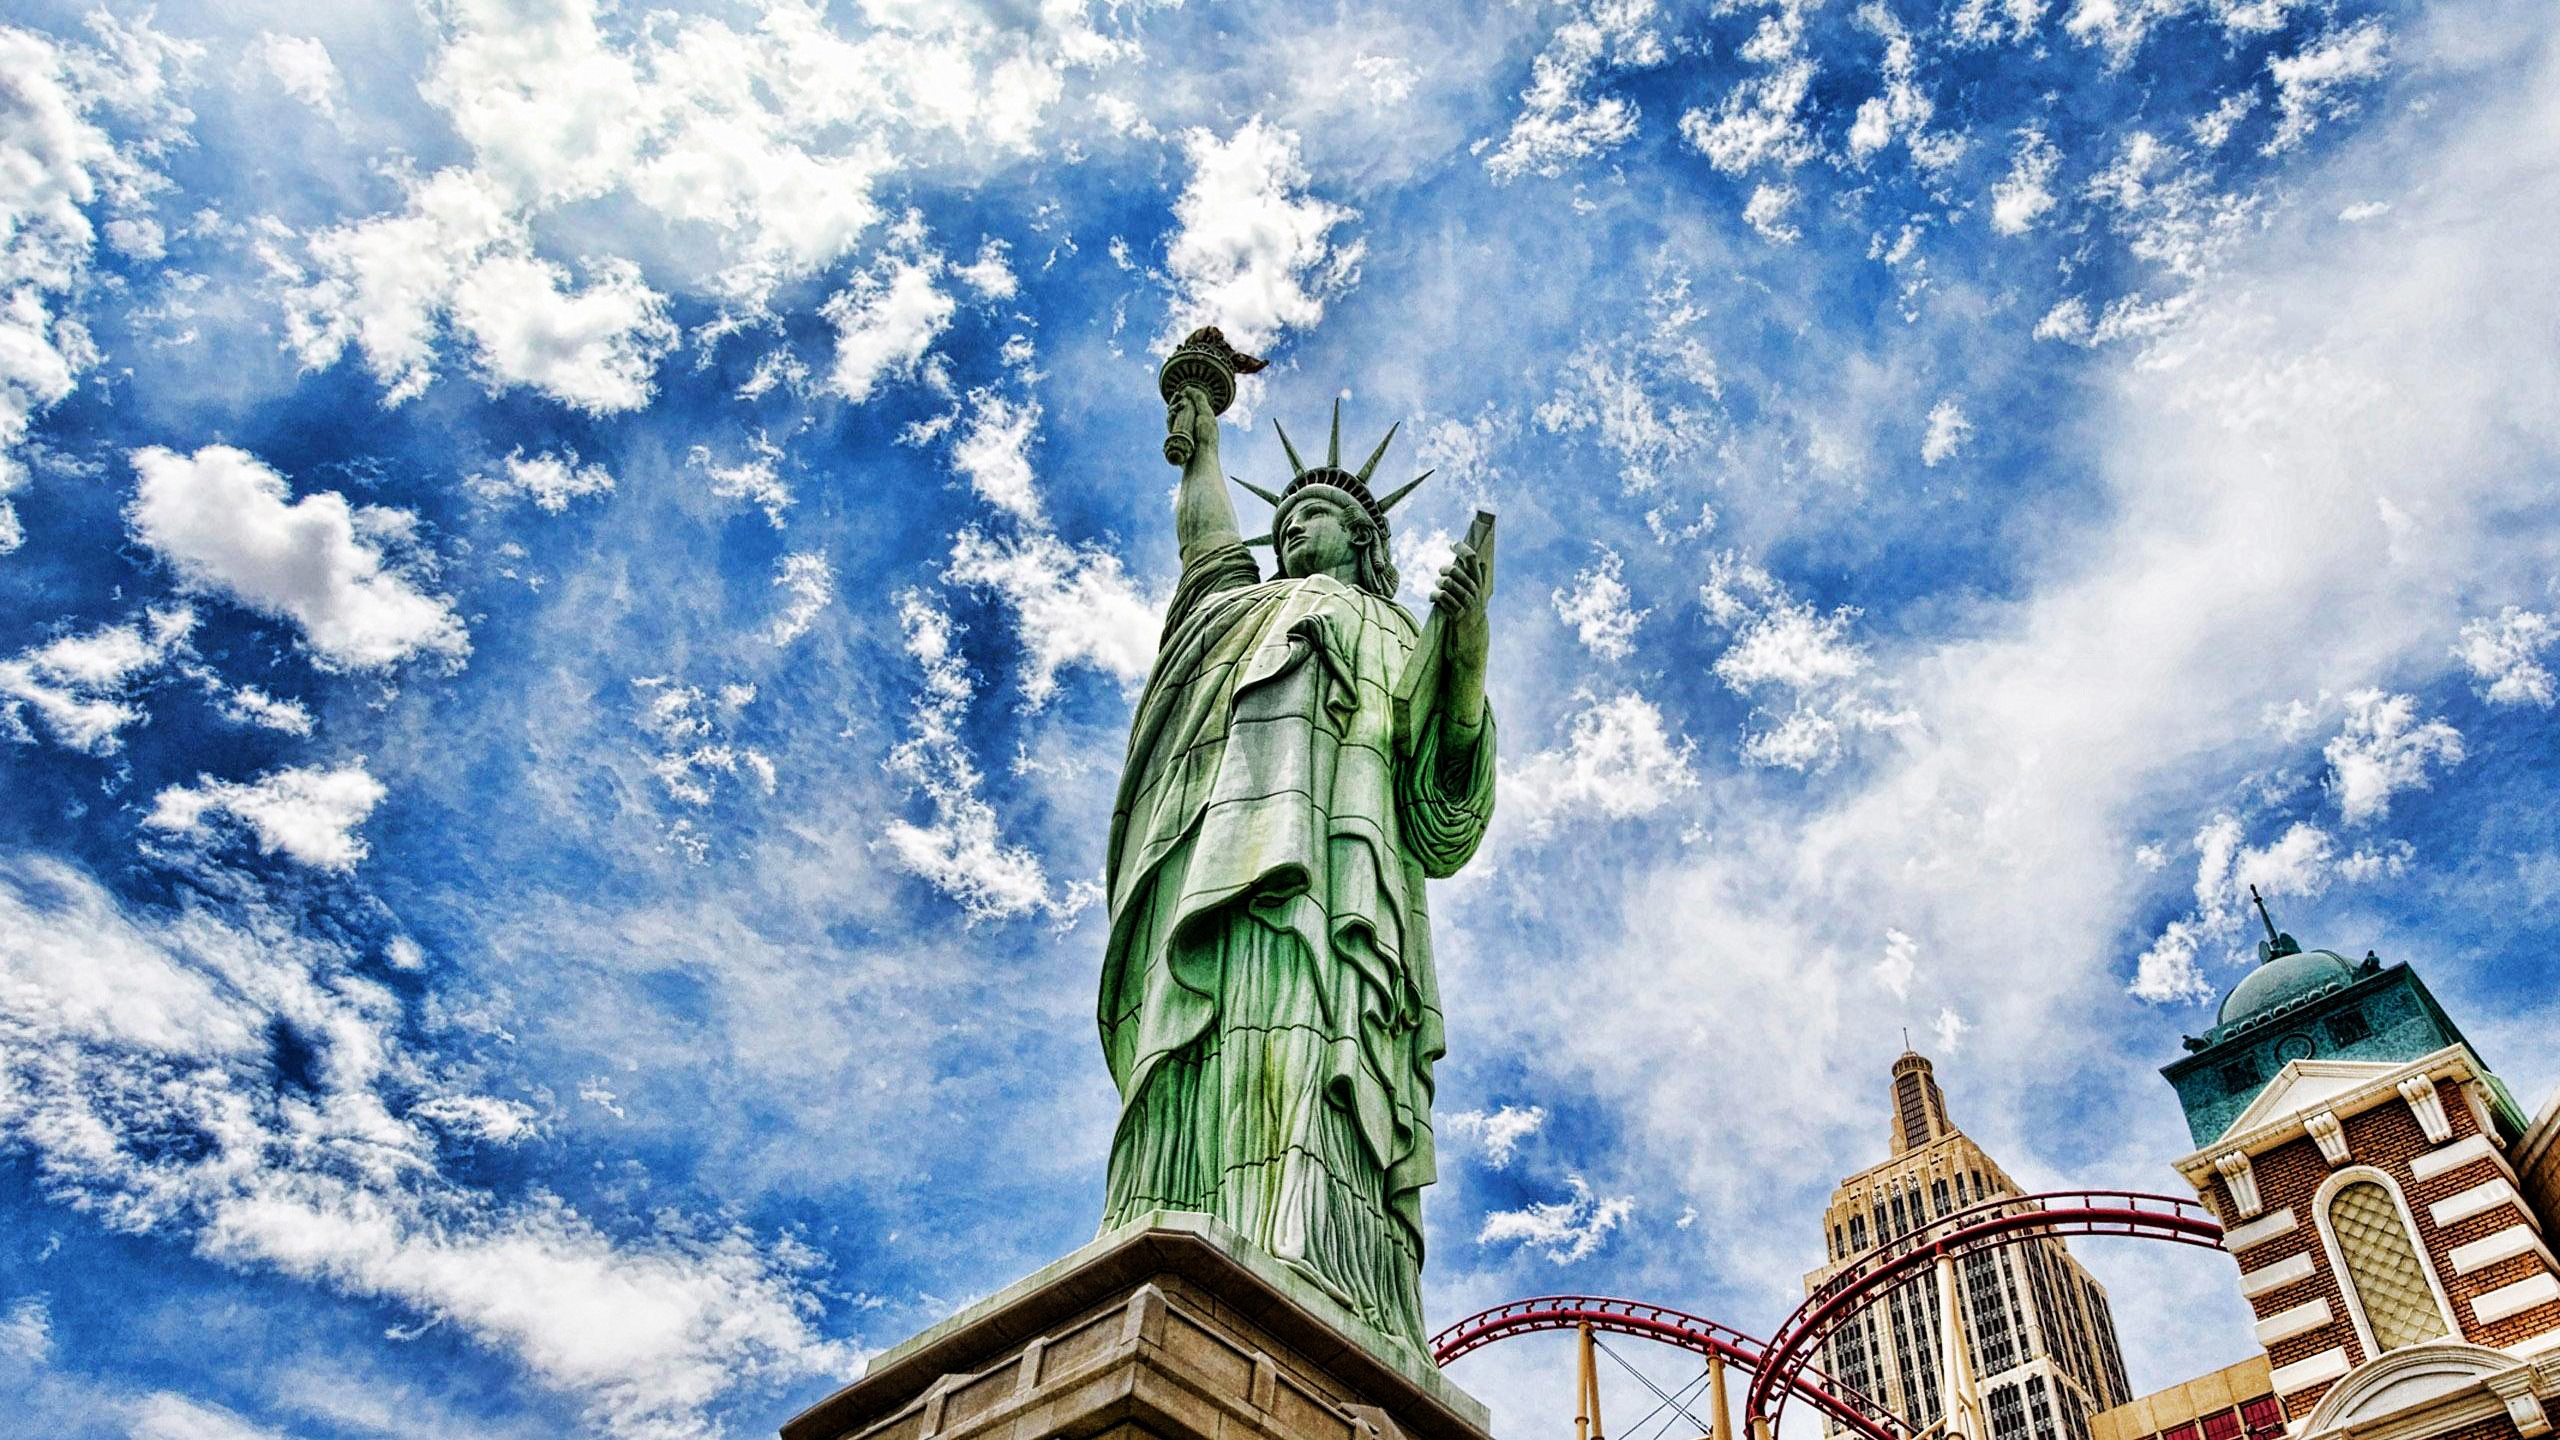 The Statue of Liberty for 2560x1440 HDTV resolution